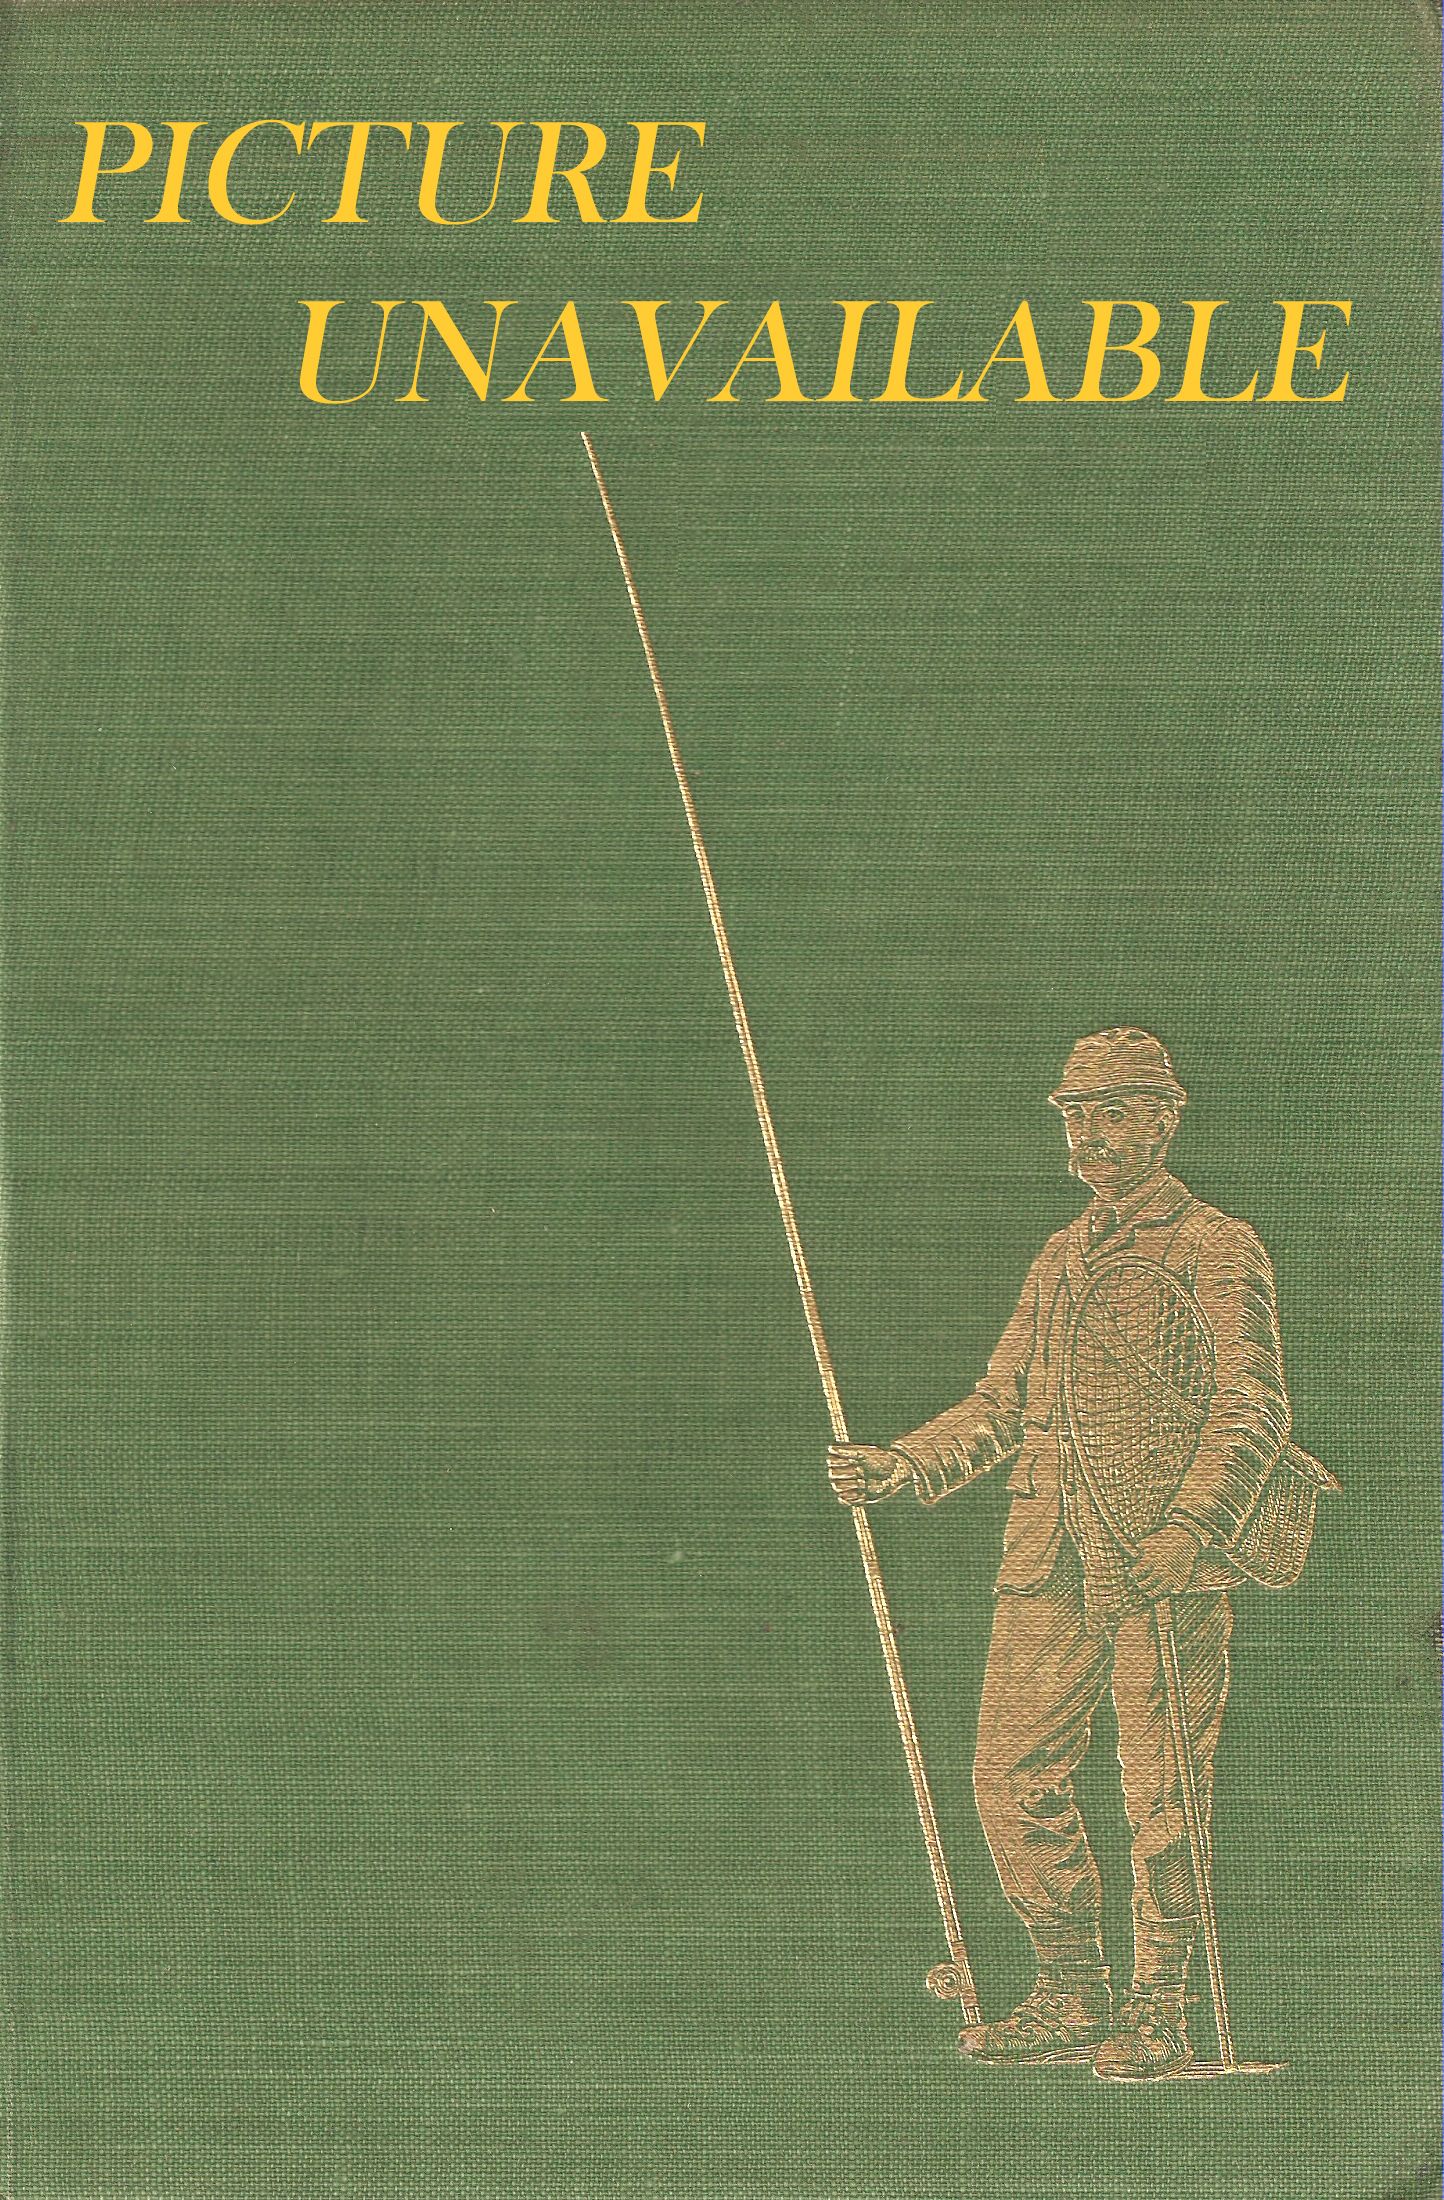 WATERSIDE COMPANIONS. By Tag Barnes. Illustrated by H. Claypoole. Foreword by Fred J. Taylor.